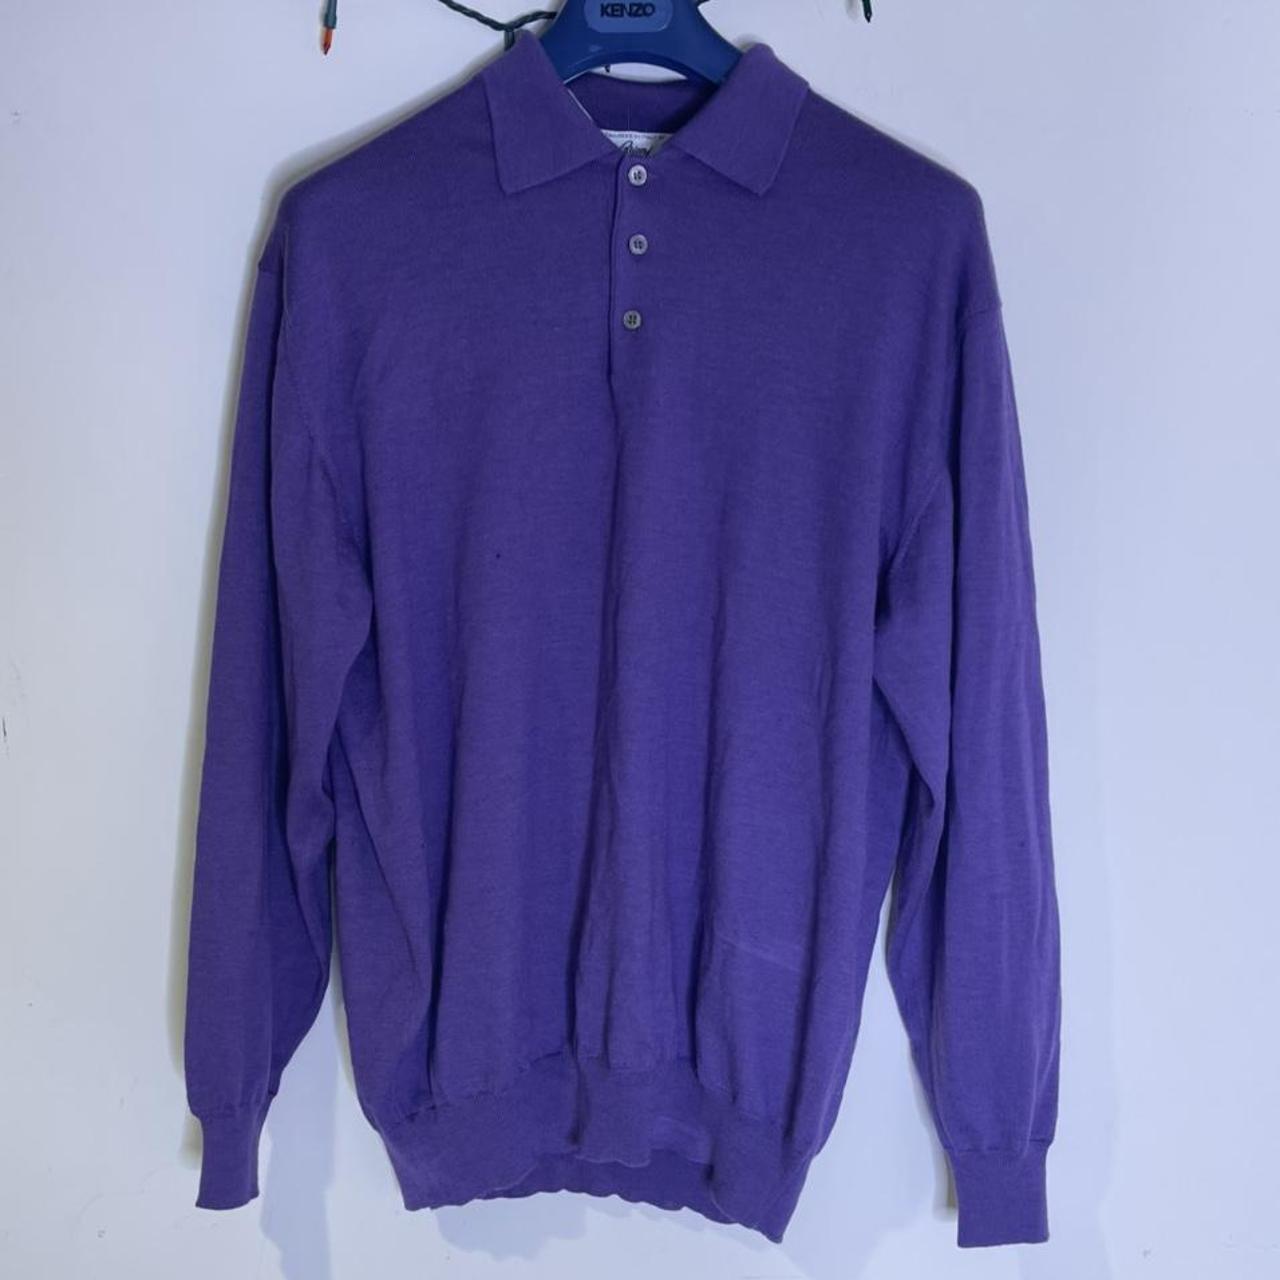 Product Image 1 - Brioni sweater , I’d guess